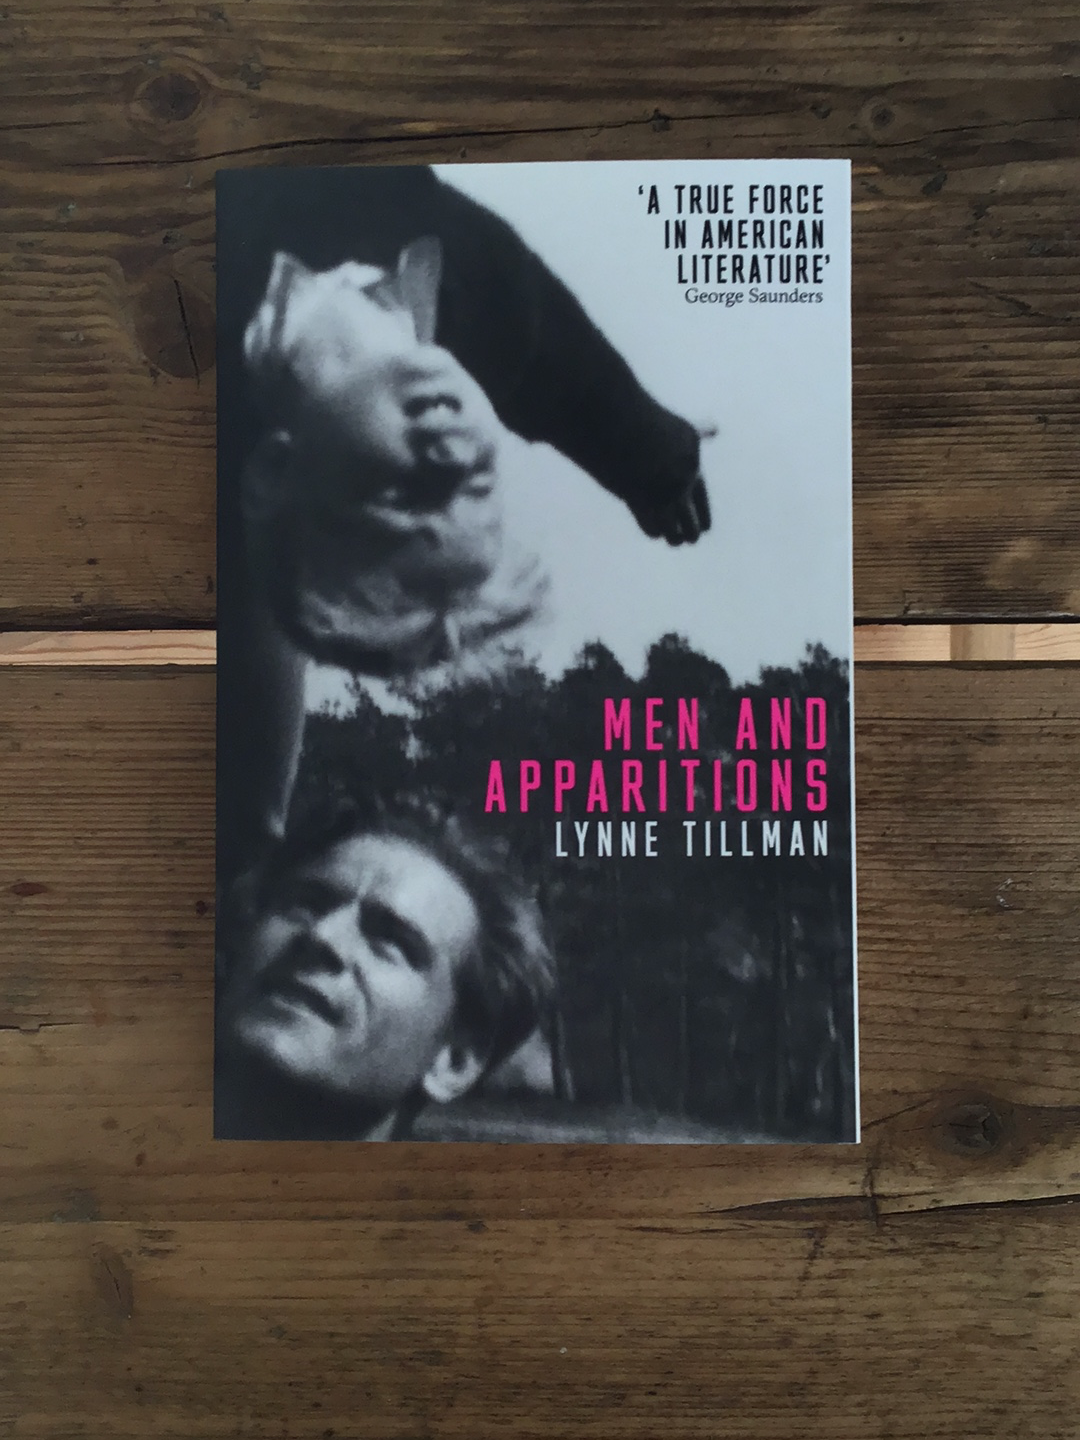 Men and Apparitions